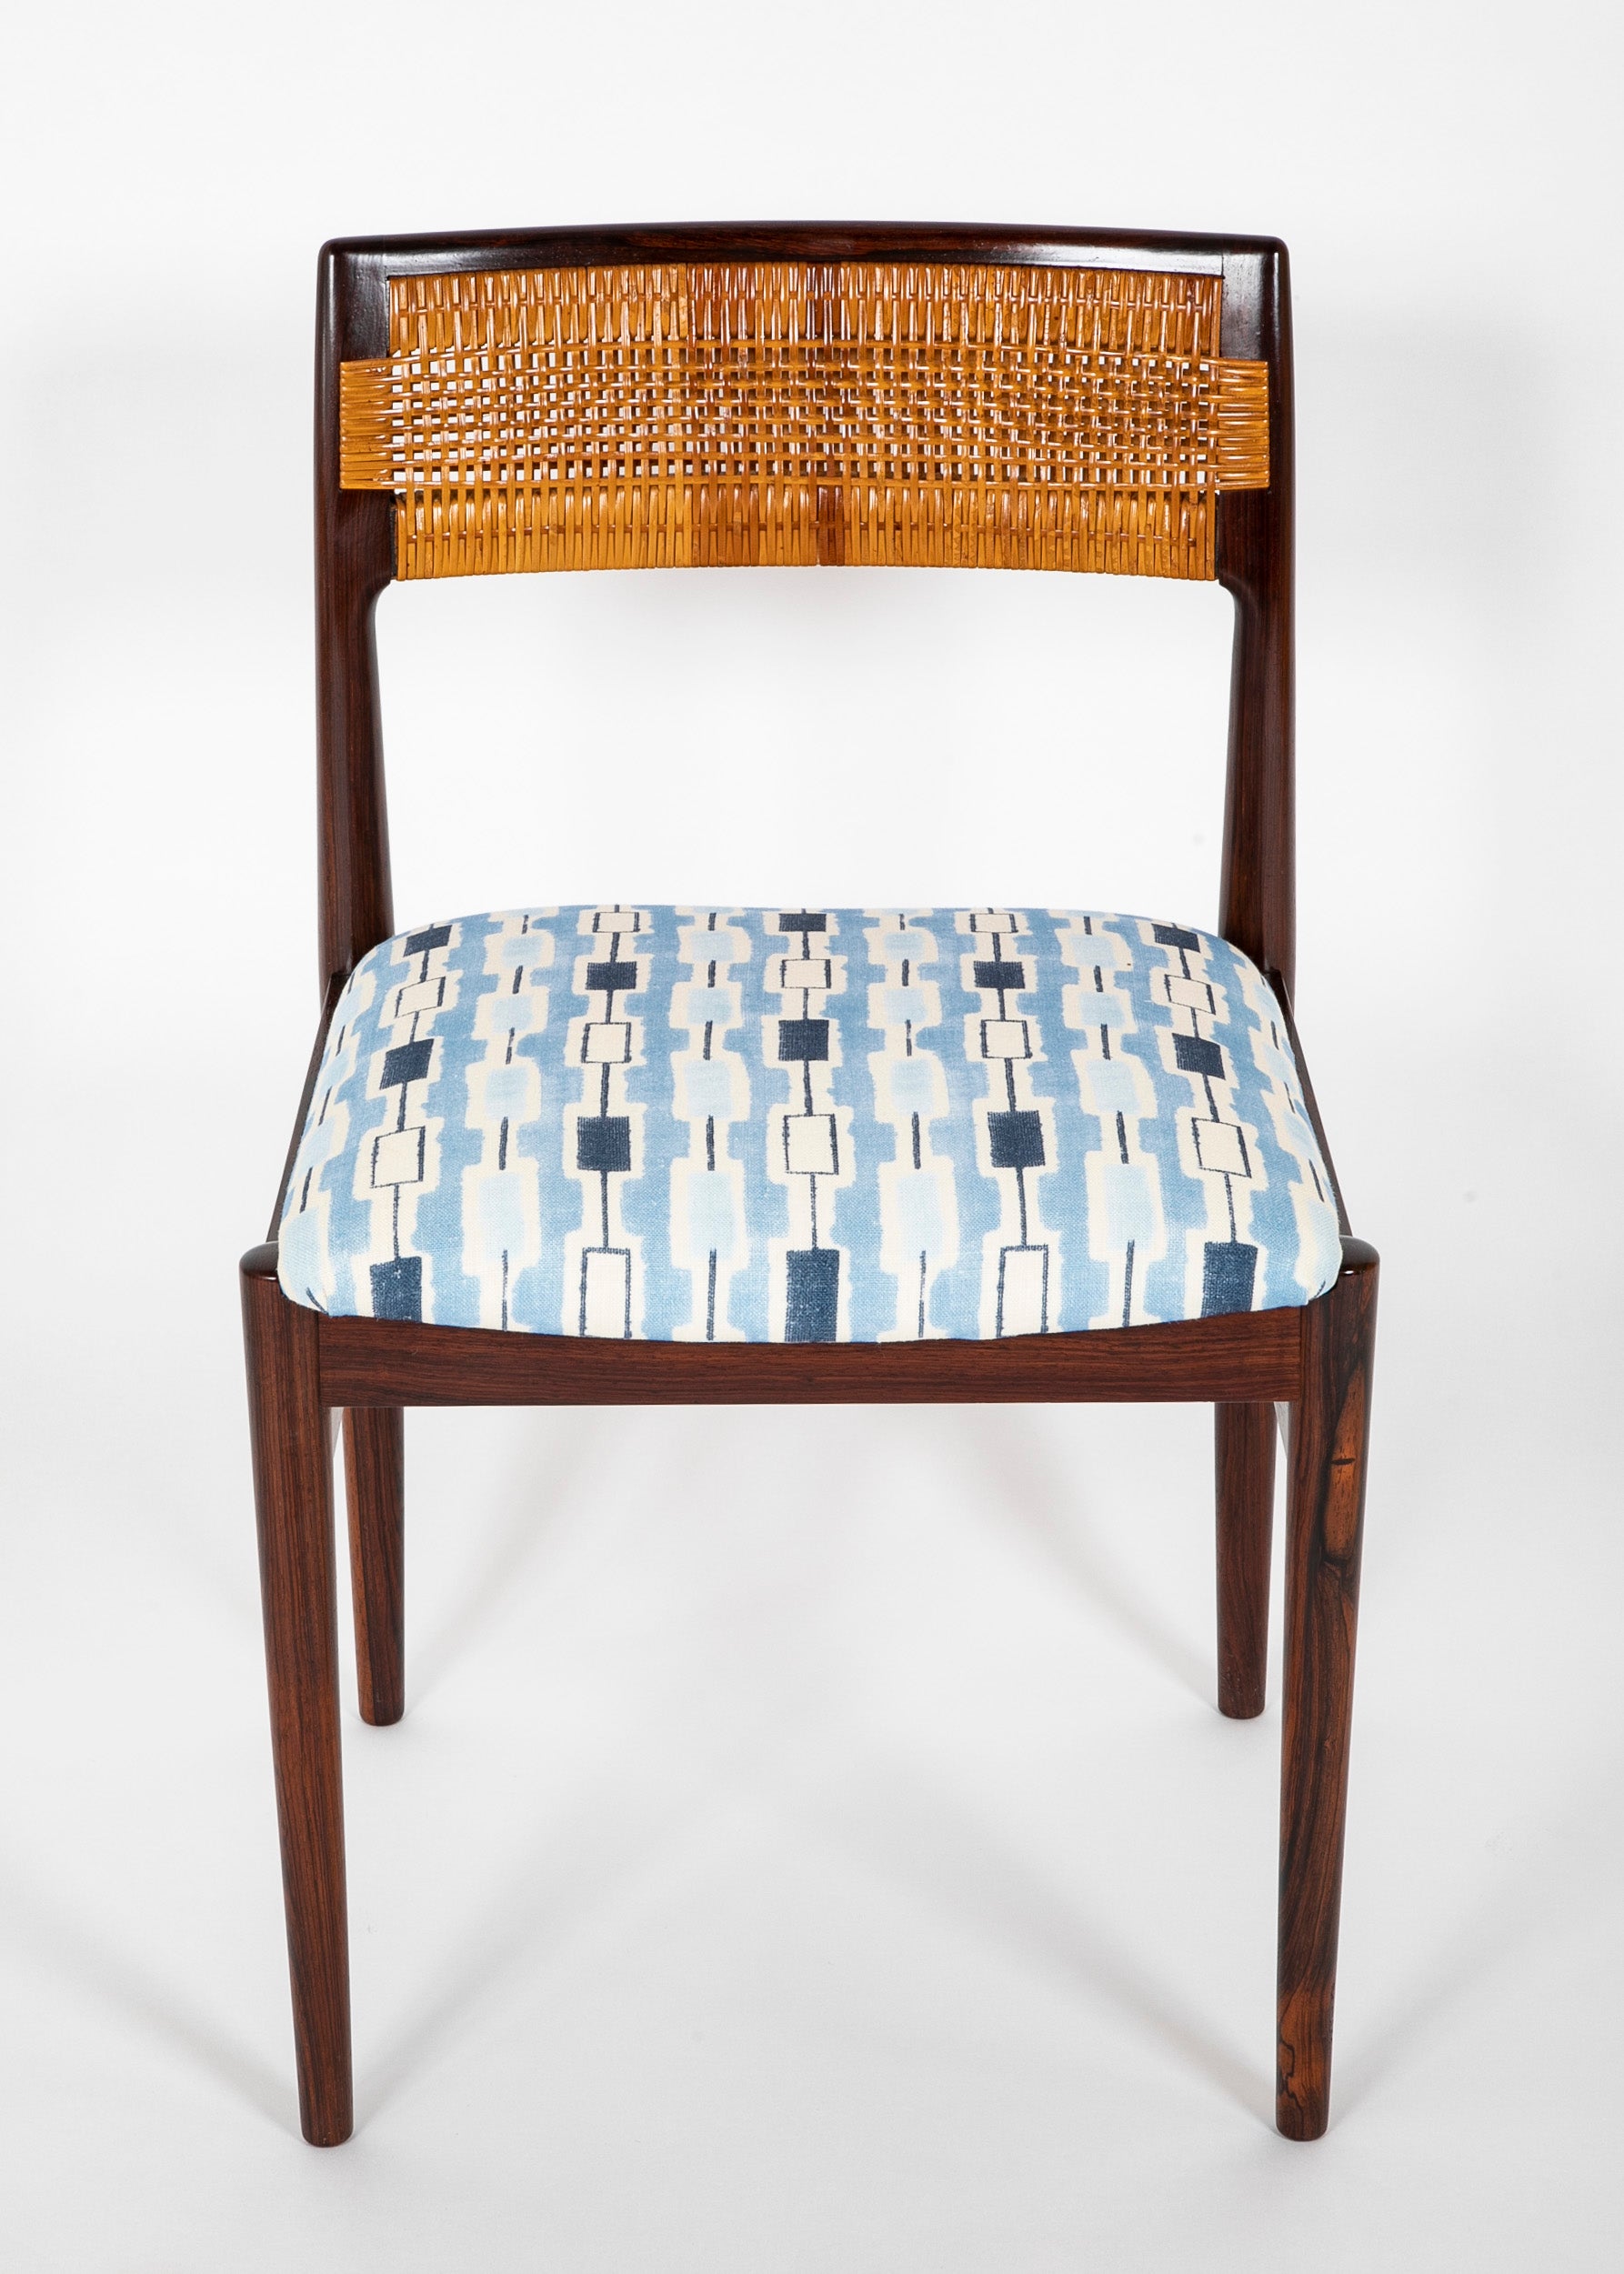 Set of Eight Dining Chairs by Erik Wortz